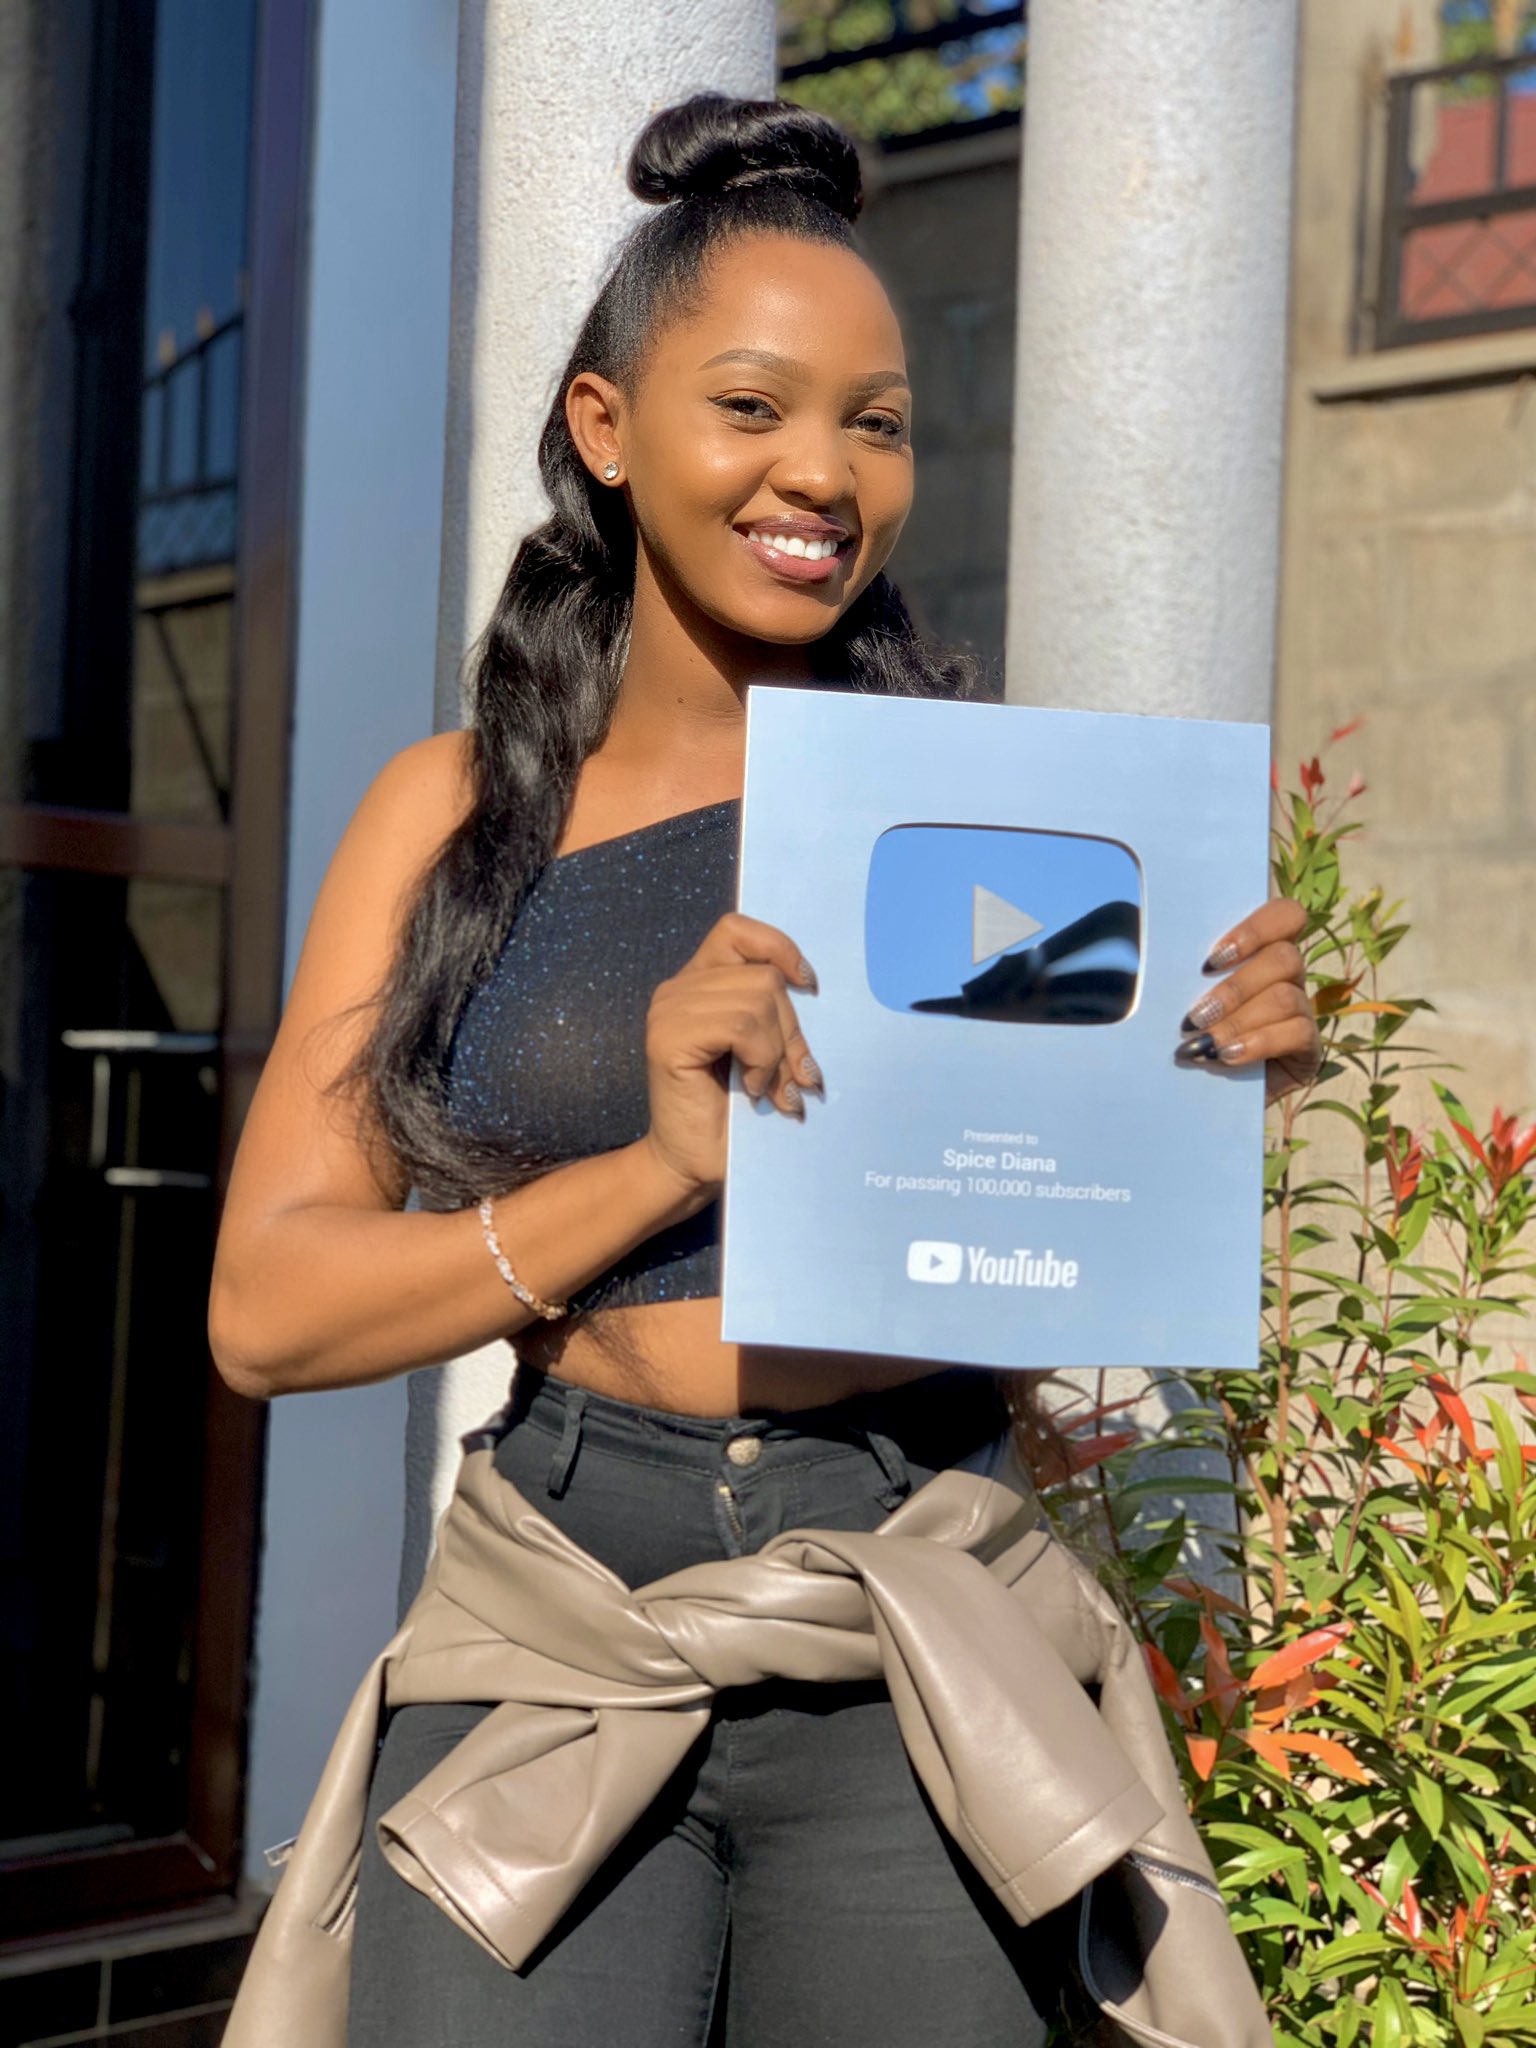 Spice Diana Receives YouTube Silver Award After Garnering 100K Subscribers 2 MUGIBSON